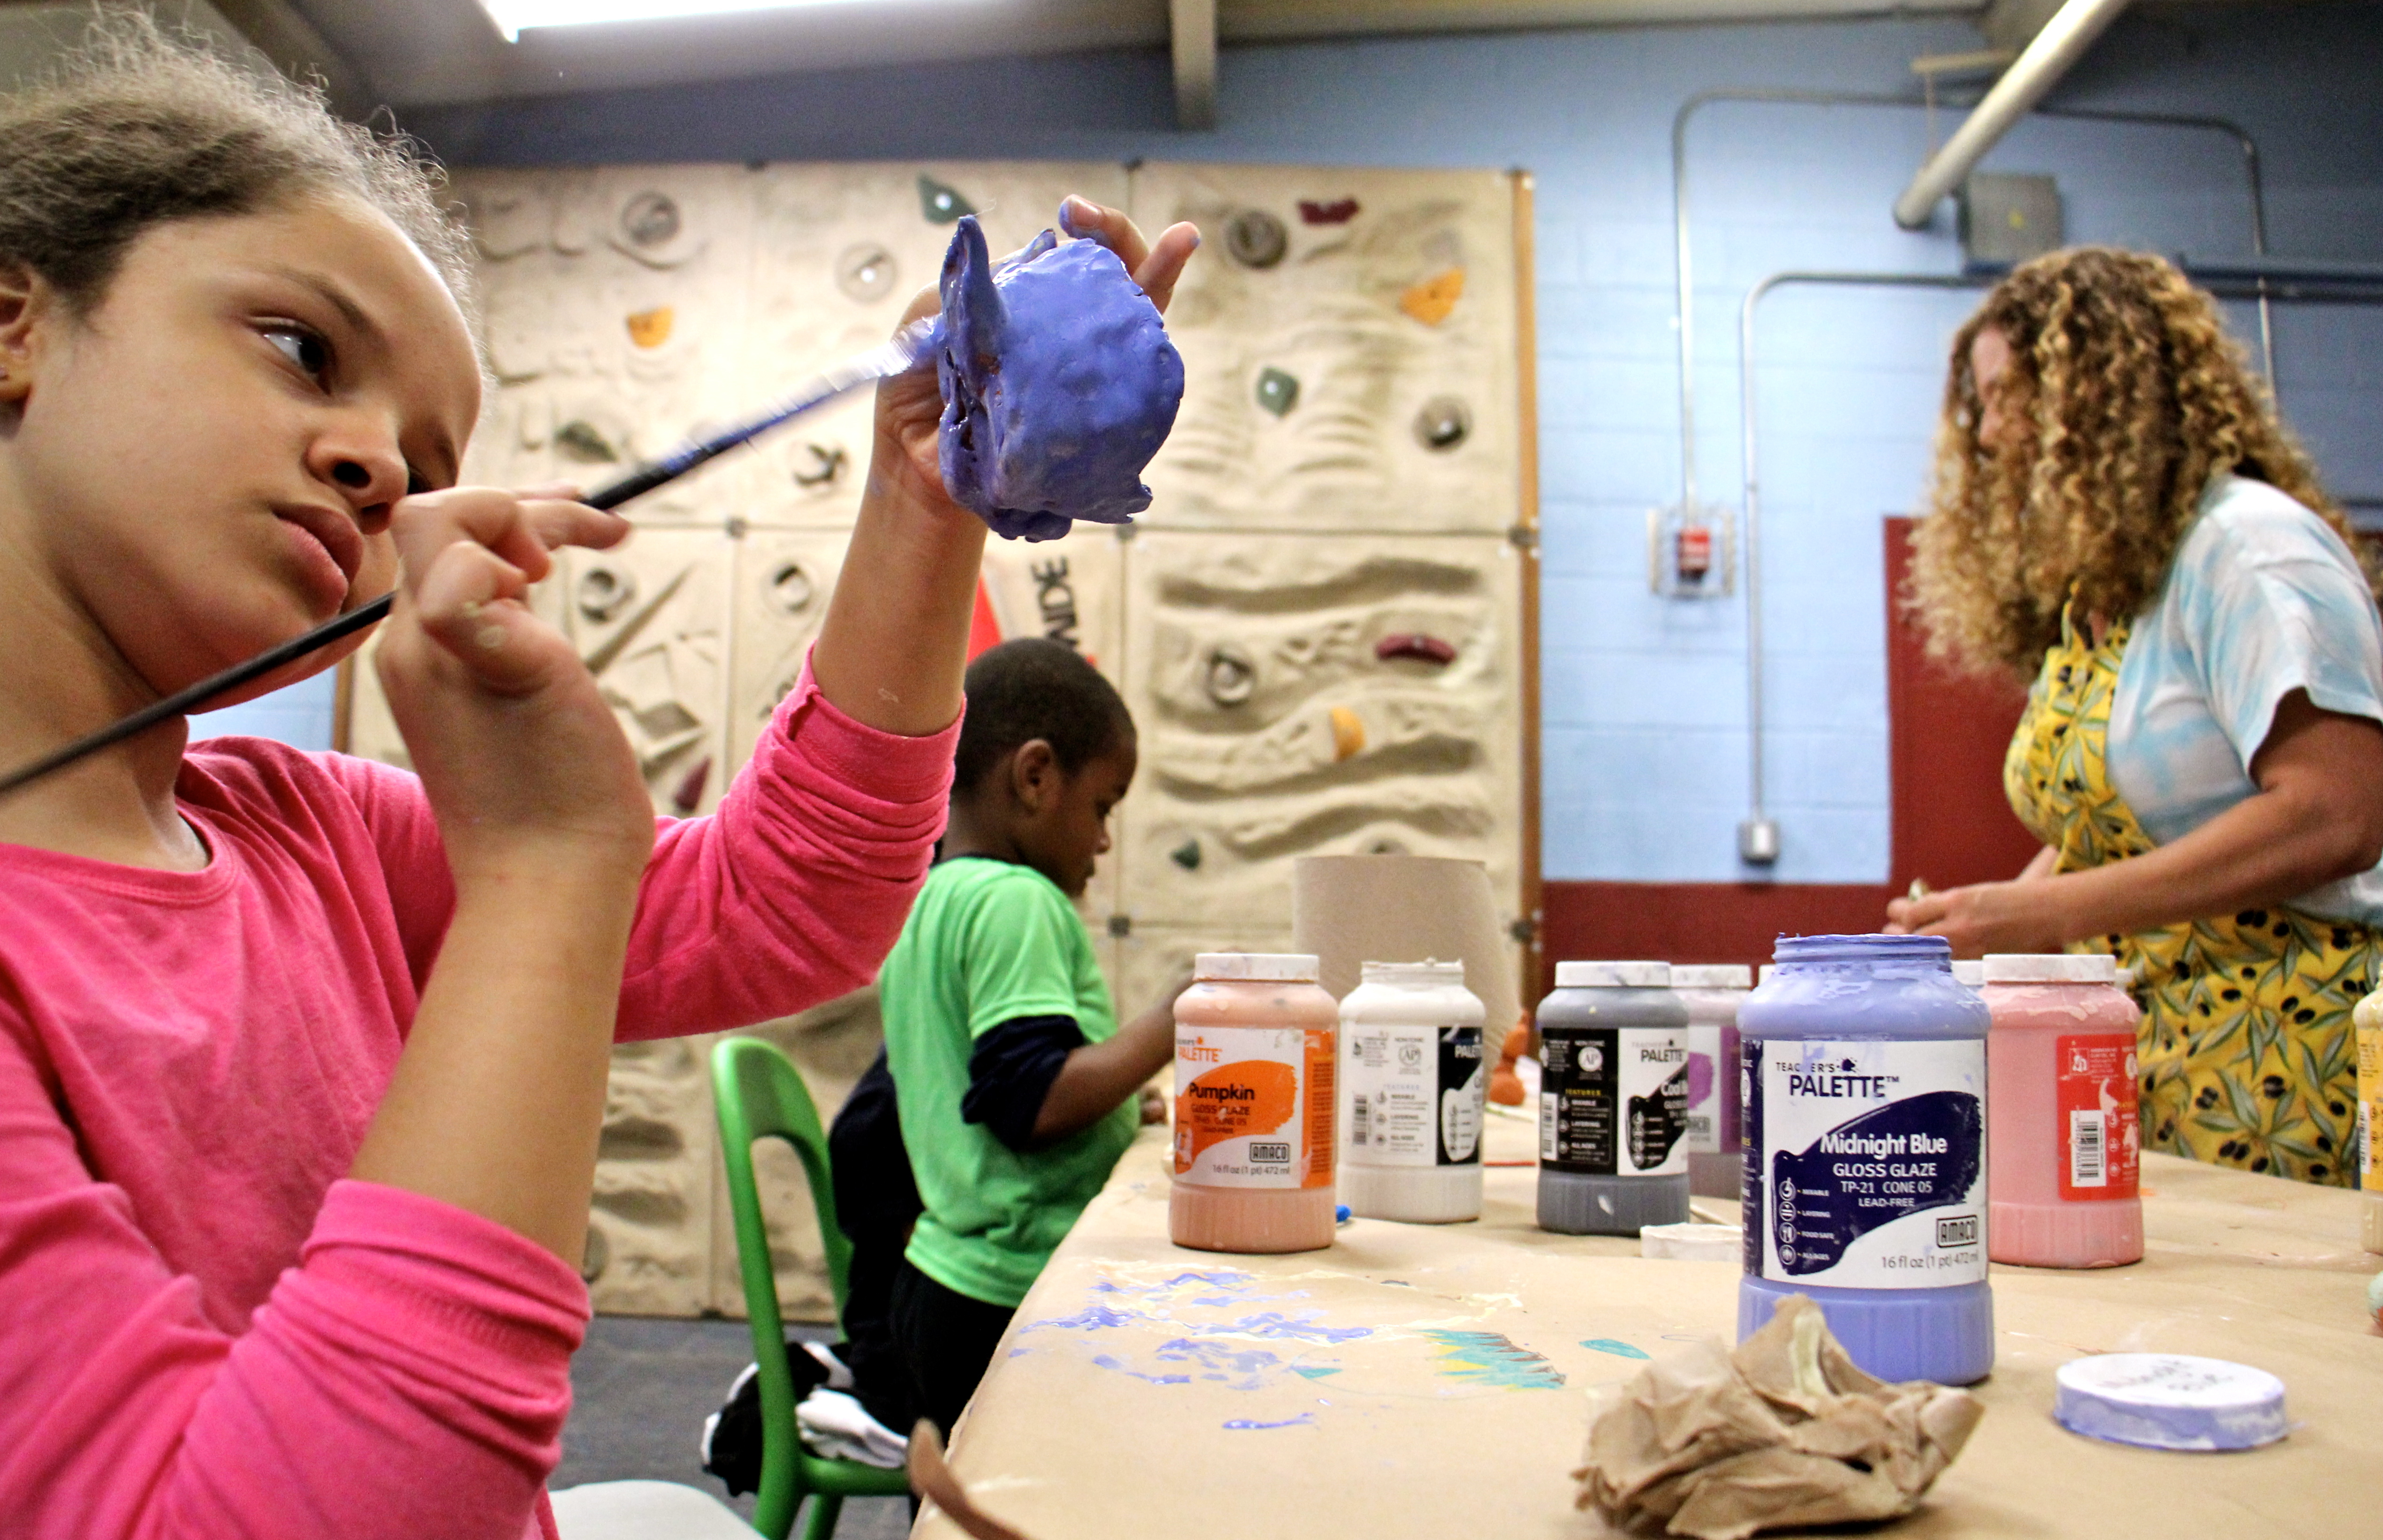 Isabel Slaughter, 8, paints a ceramic sculpture in Emily Coleman's ceramics class at Olney Rec Center. (Emma Lee/WHYY)